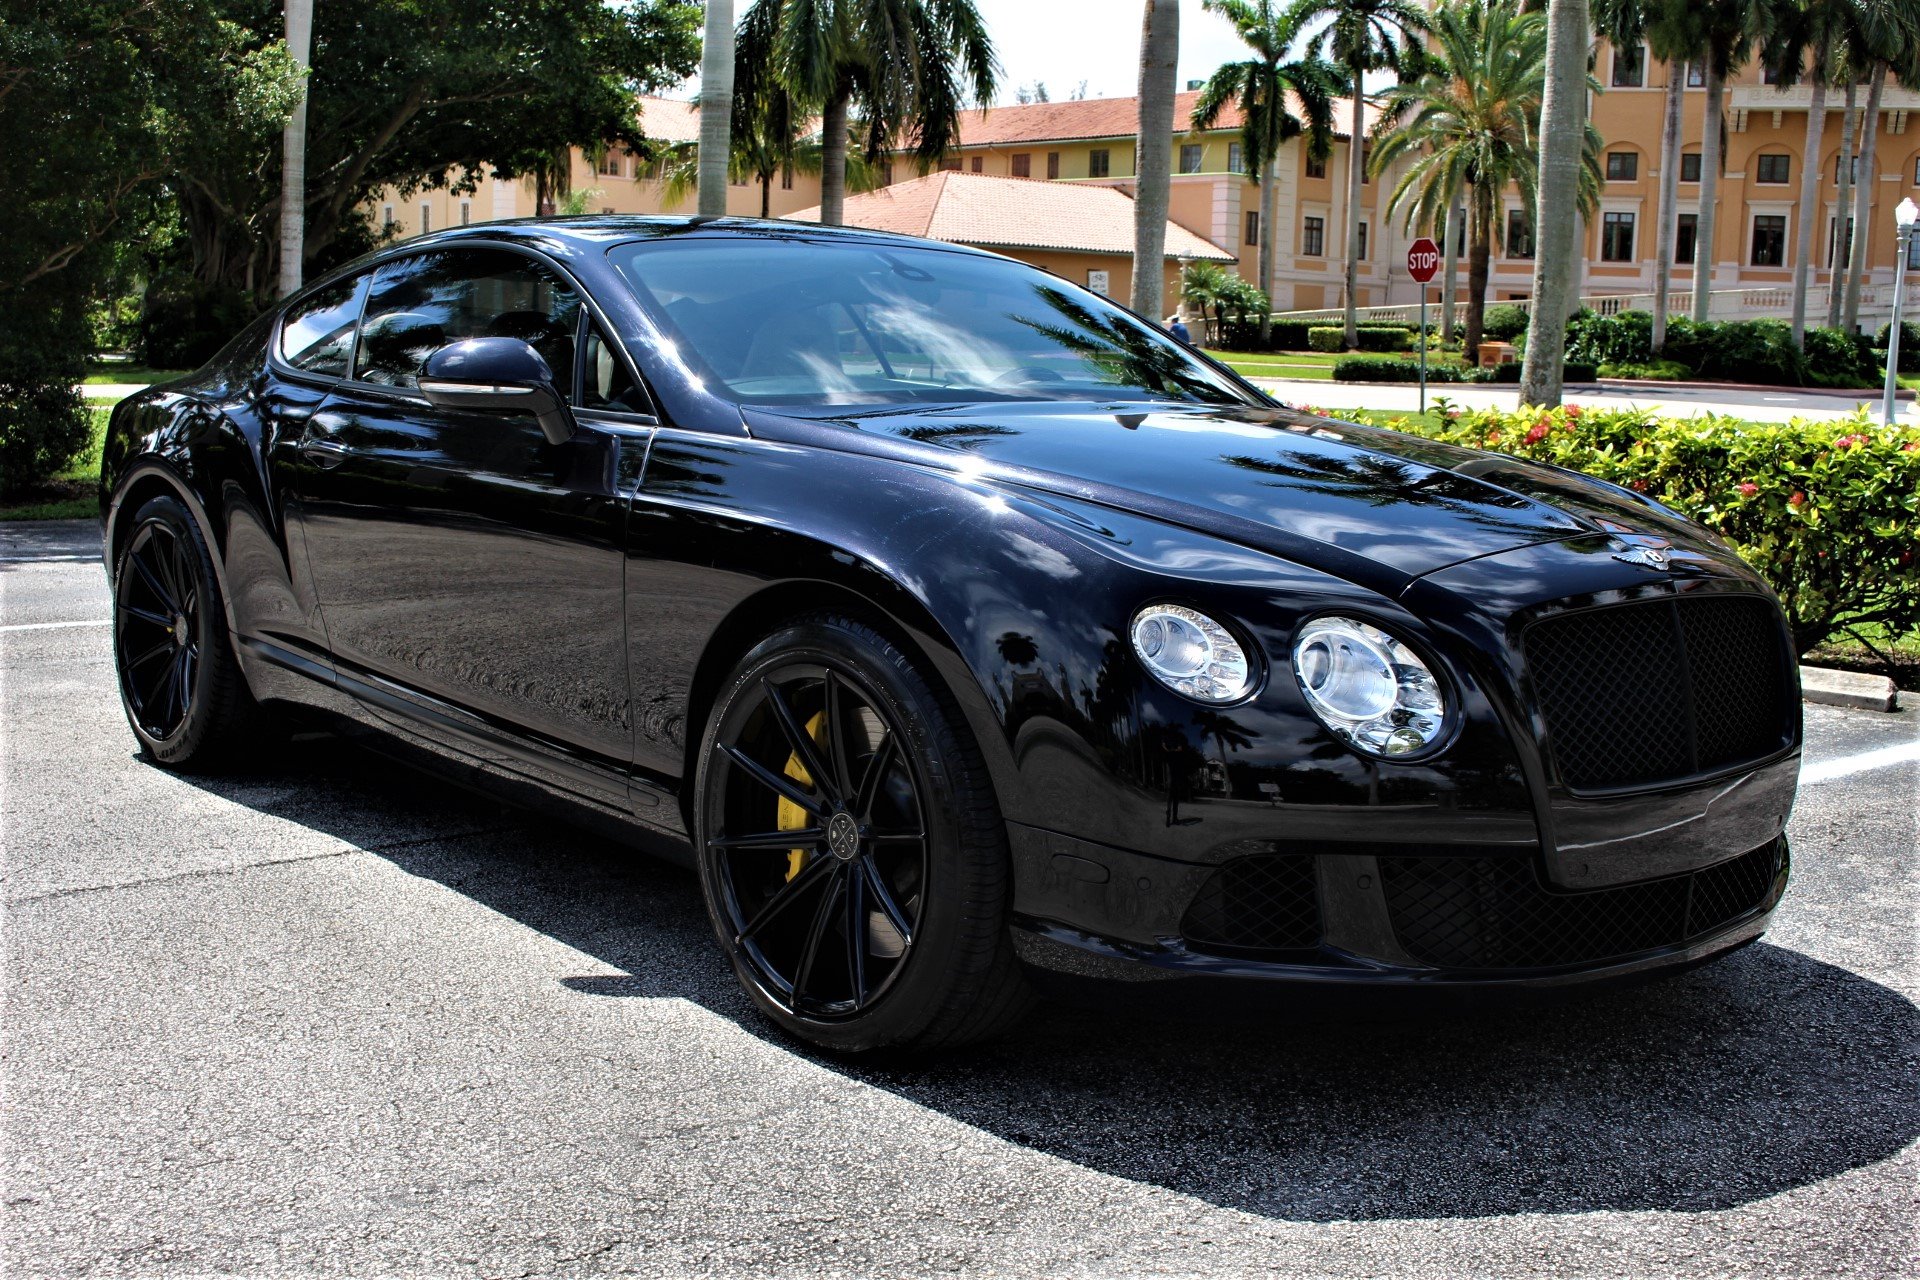 Used 2012 Bentley Continental GT for sale Sold at The Gables Sports Cars in Miami FL 33146 4